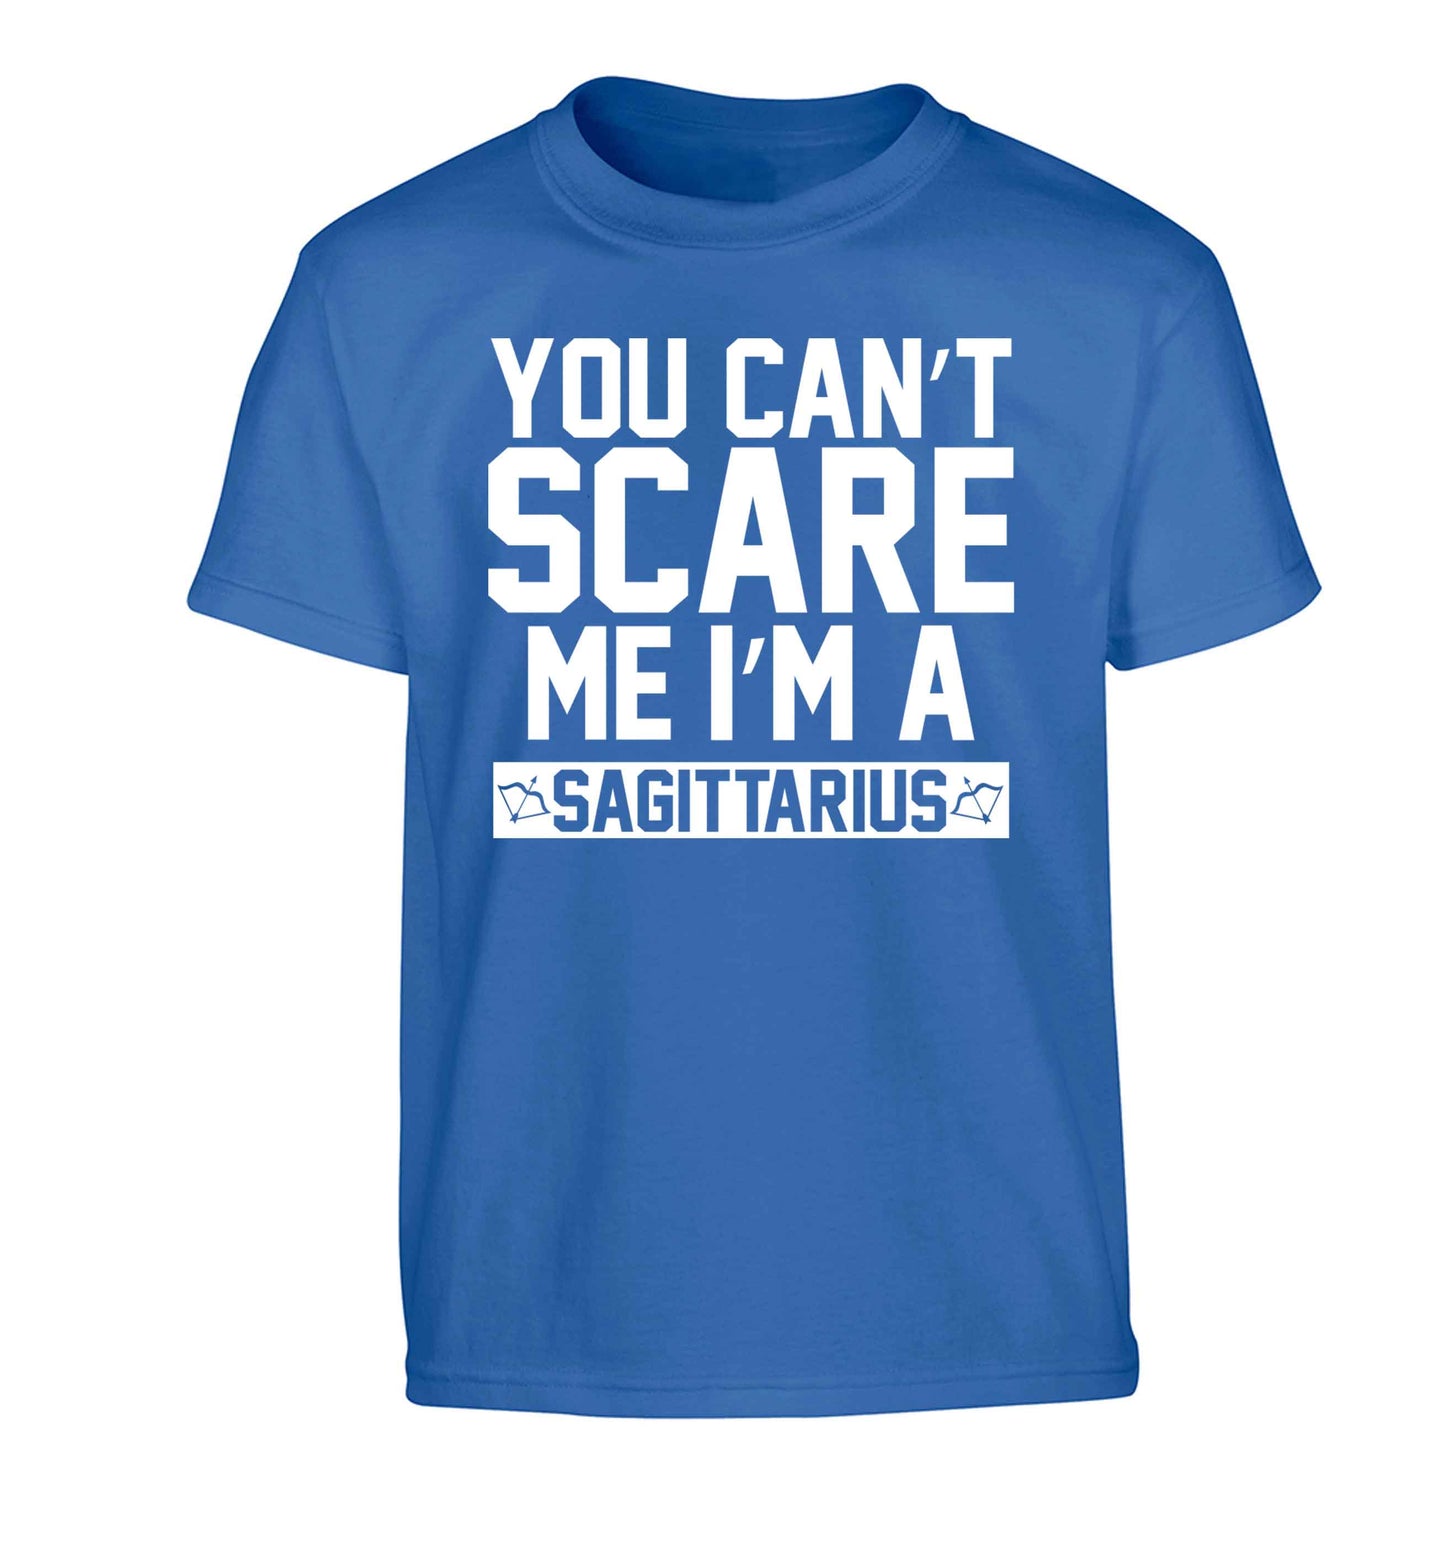 You can't scare me I'm a sagittarius Children's blue Tshirt 12-13 Years